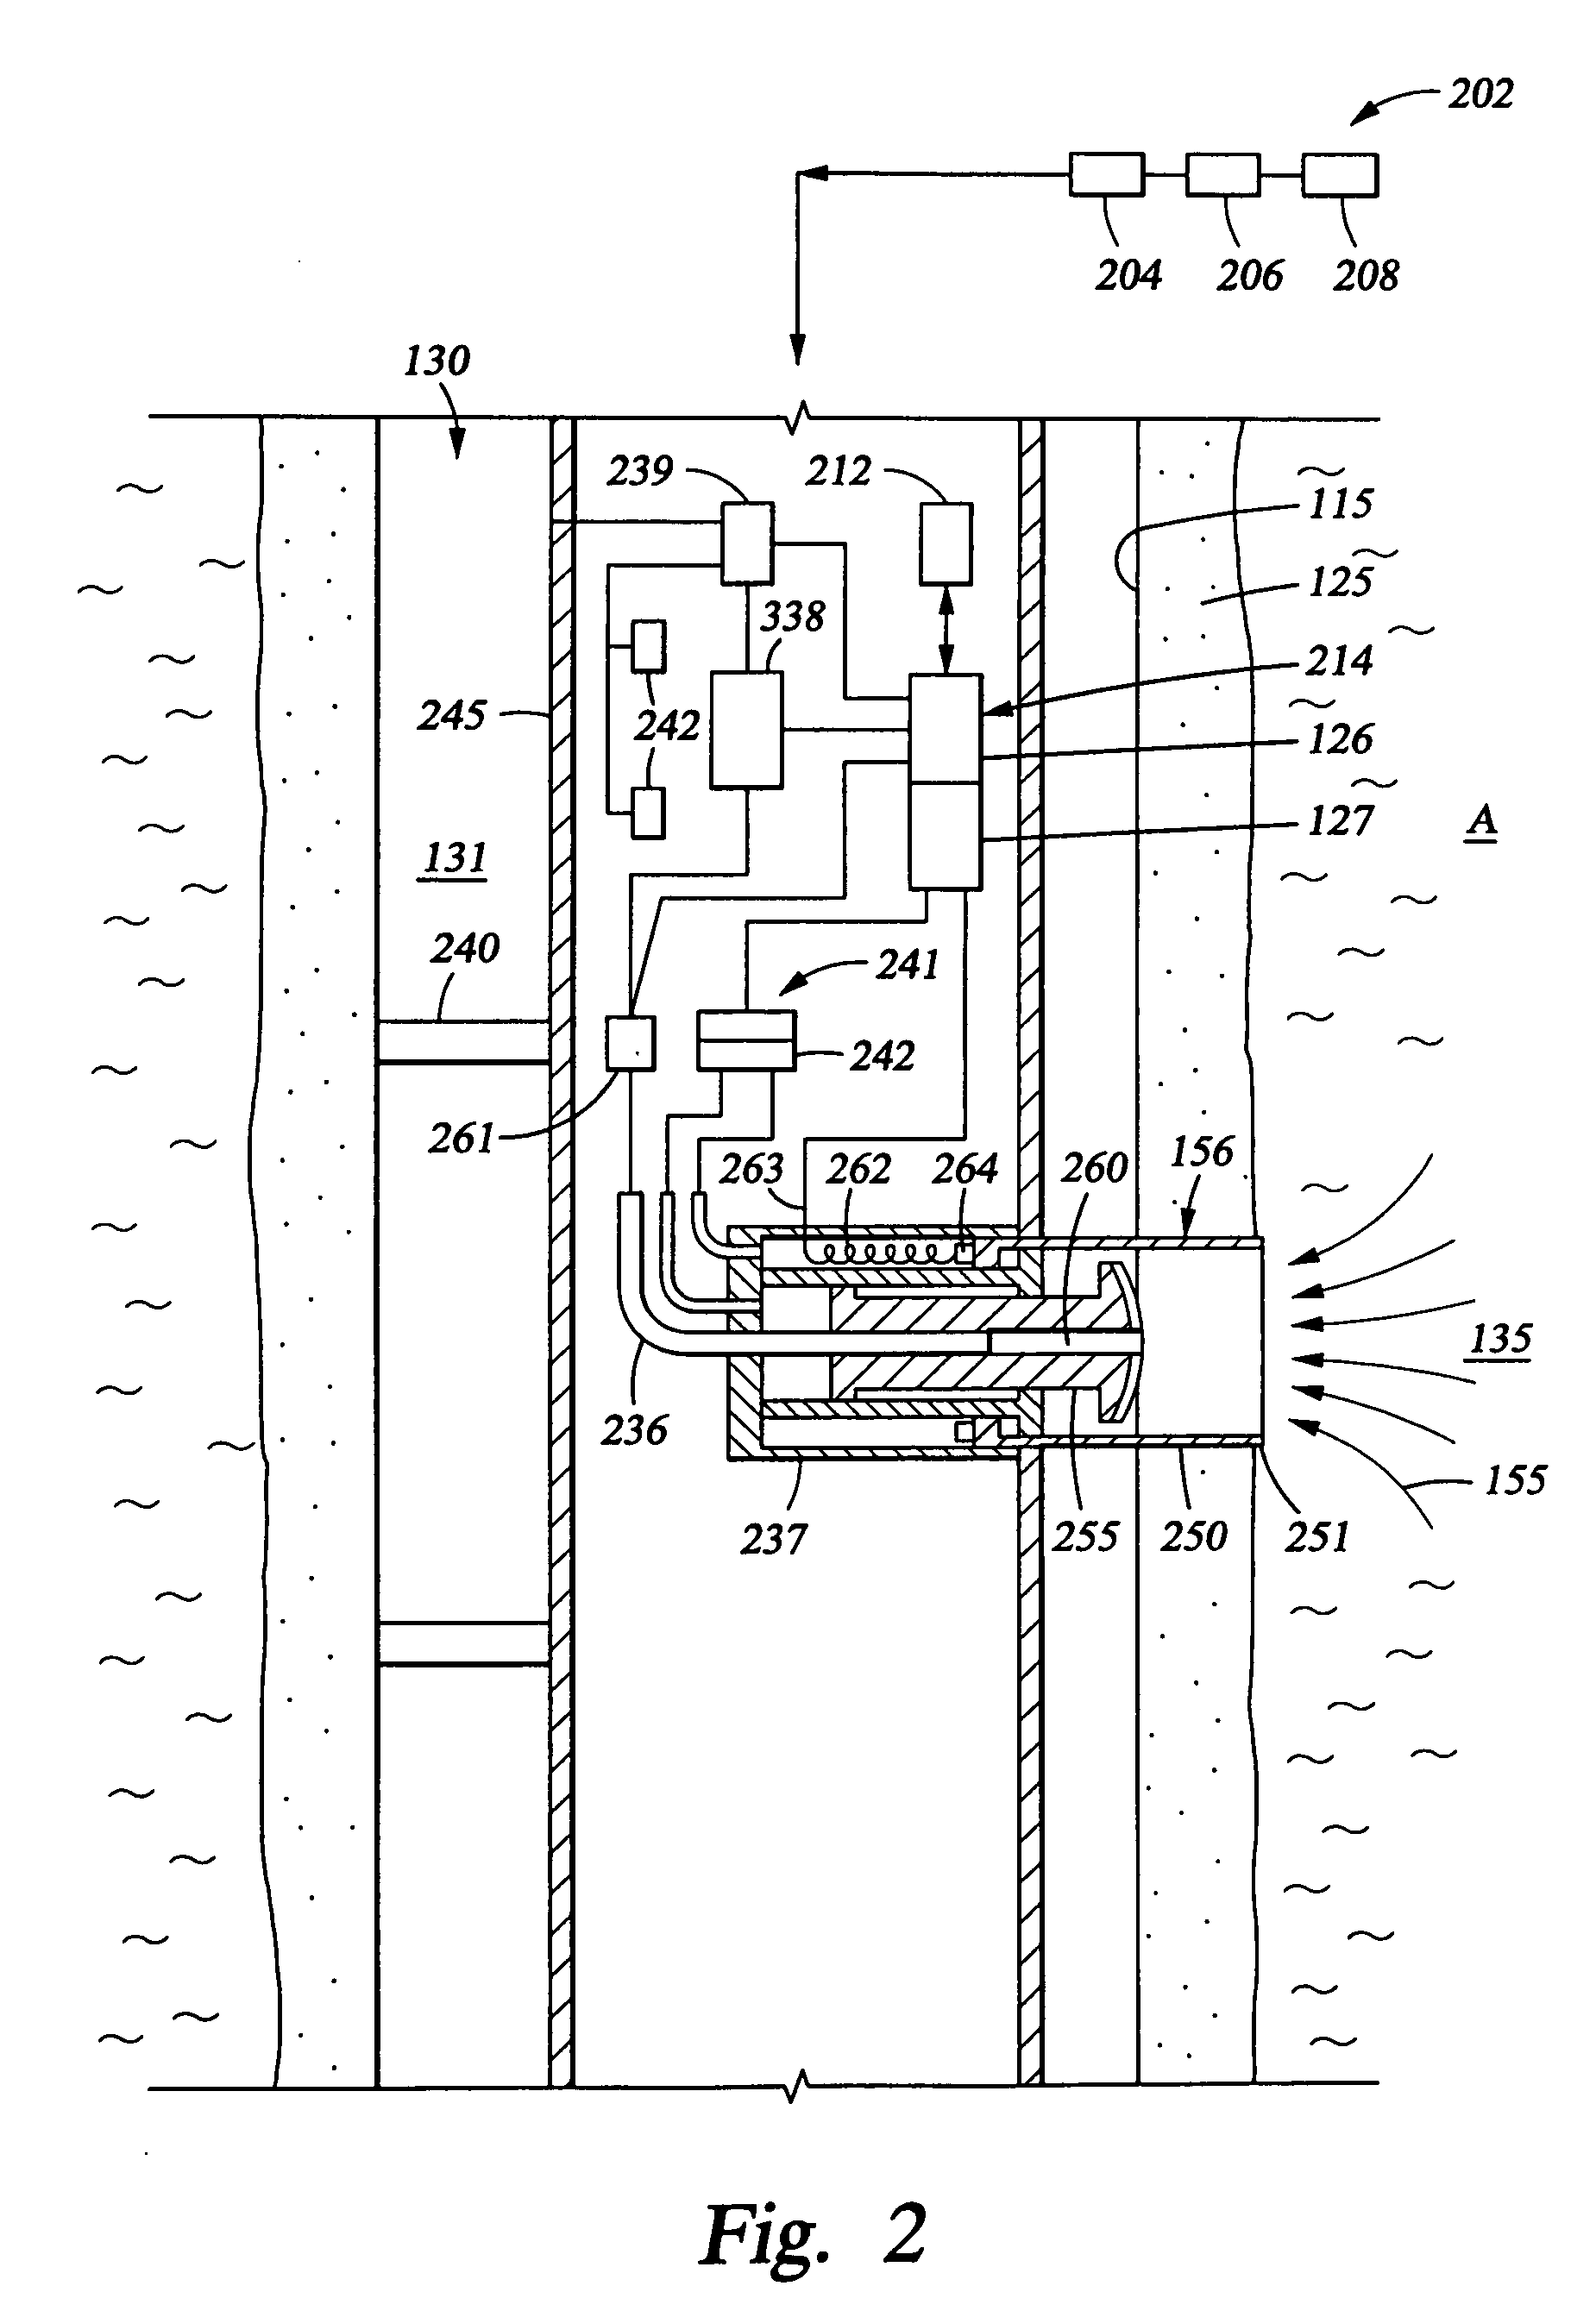 Method and apparatus for collecting fluid samples downhole